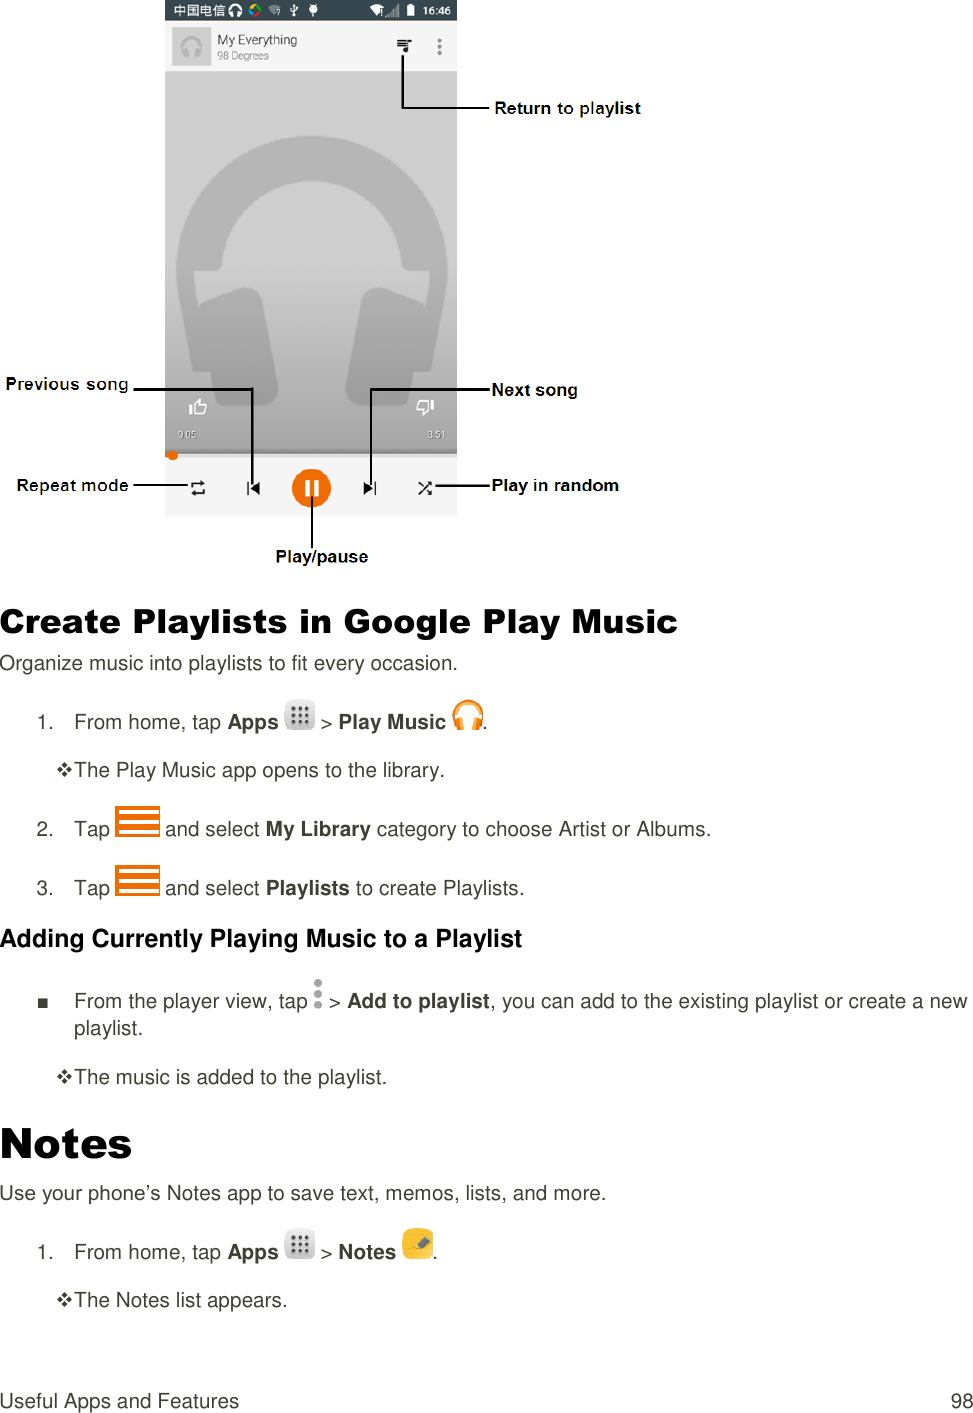 Useful Apps and Features  98  Create Playlists in Google Play Music Organize music into playlists to fit every occasion. 1.  From home, tap Apps   &gt; Play Music  .  The Play Music app opens to the library. 2.  Tap   and select My Library category to choose Artist or Albums. 3.  Tap   and select Playlists to create Playlists. Adding Currently Playing Music to a Playlist ■ From the player view, tap   &gt; Add to playlist, you can add to the existing playlist or create a new playlist.  The music is added to the playlist. Notes Use your phone’s Notes app to save text, memos, lists, and more. 1.  From home, tap Apps   &gt; Notes  .  The Notes list appears. 